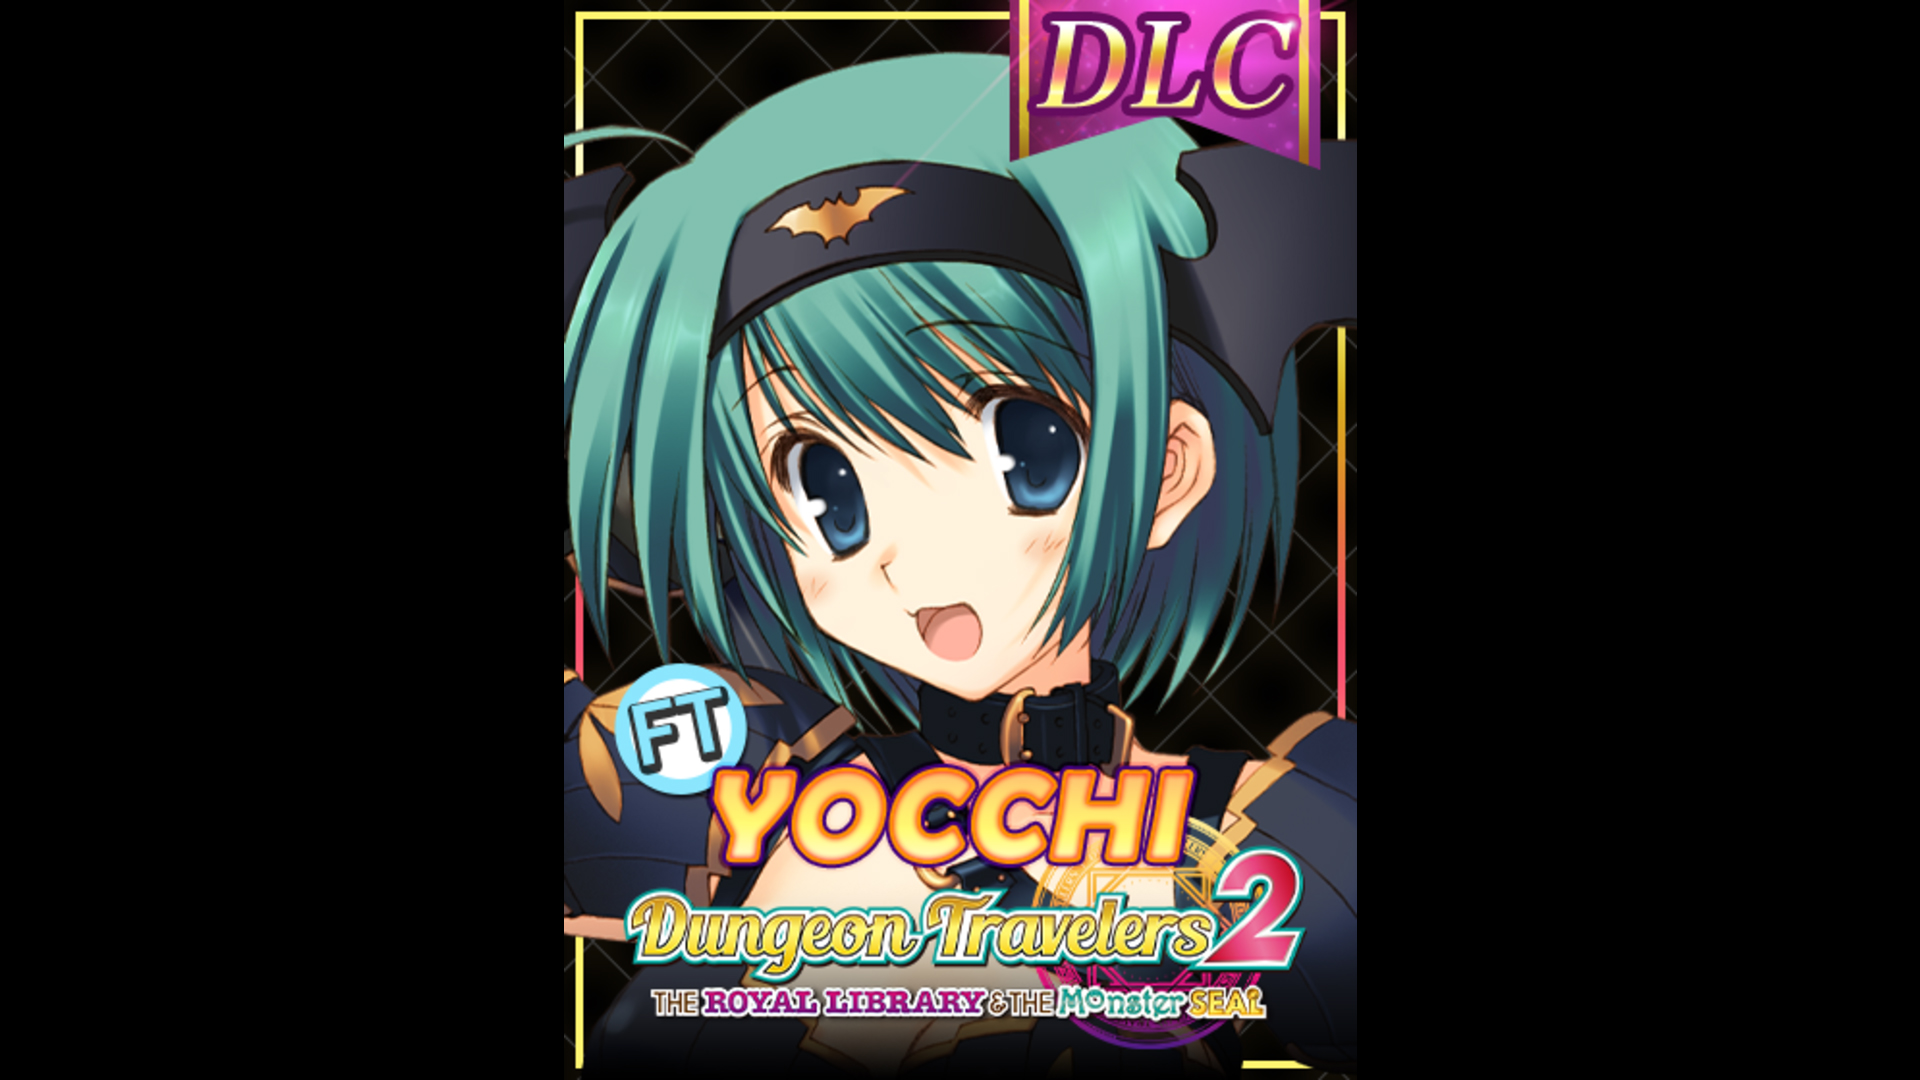 DLC - To Heart 2 Character: Fighter Yocchi (Dungeon Travelers 2) - RPG - 1